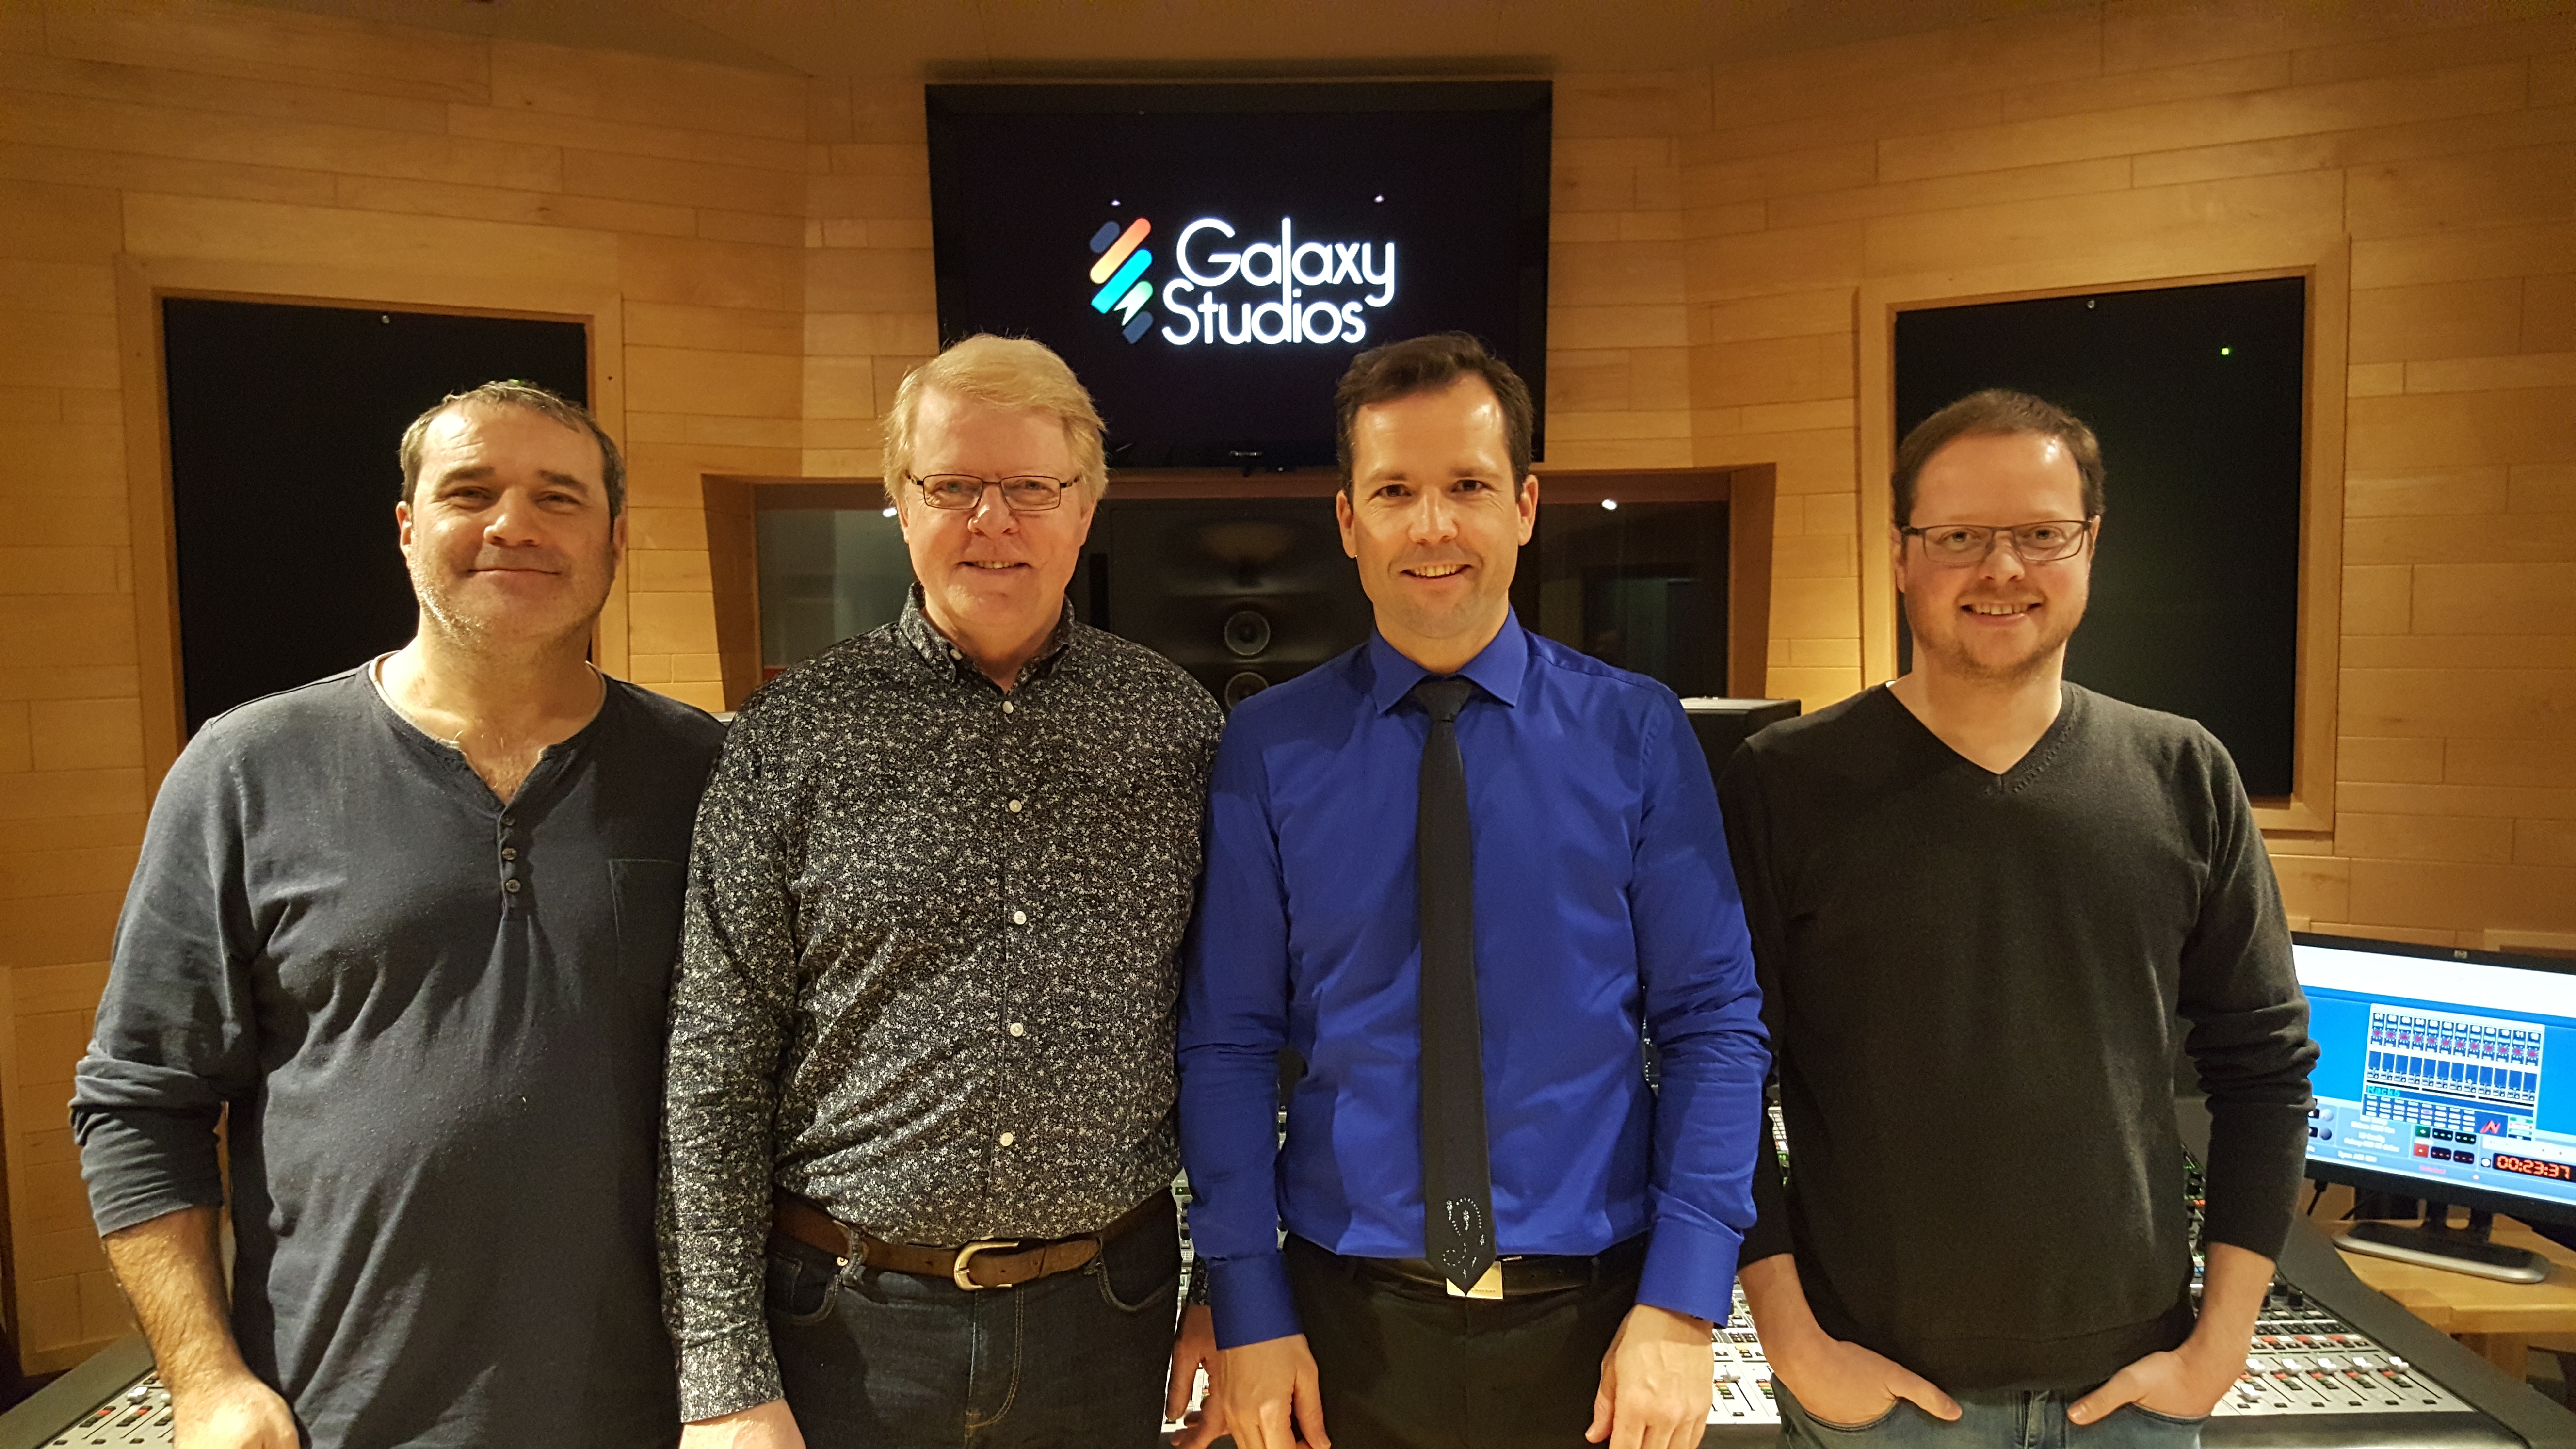 Studio Galaxy 2019 with José SCHYNS, Yves SEGERS and Patrick LEMMENS